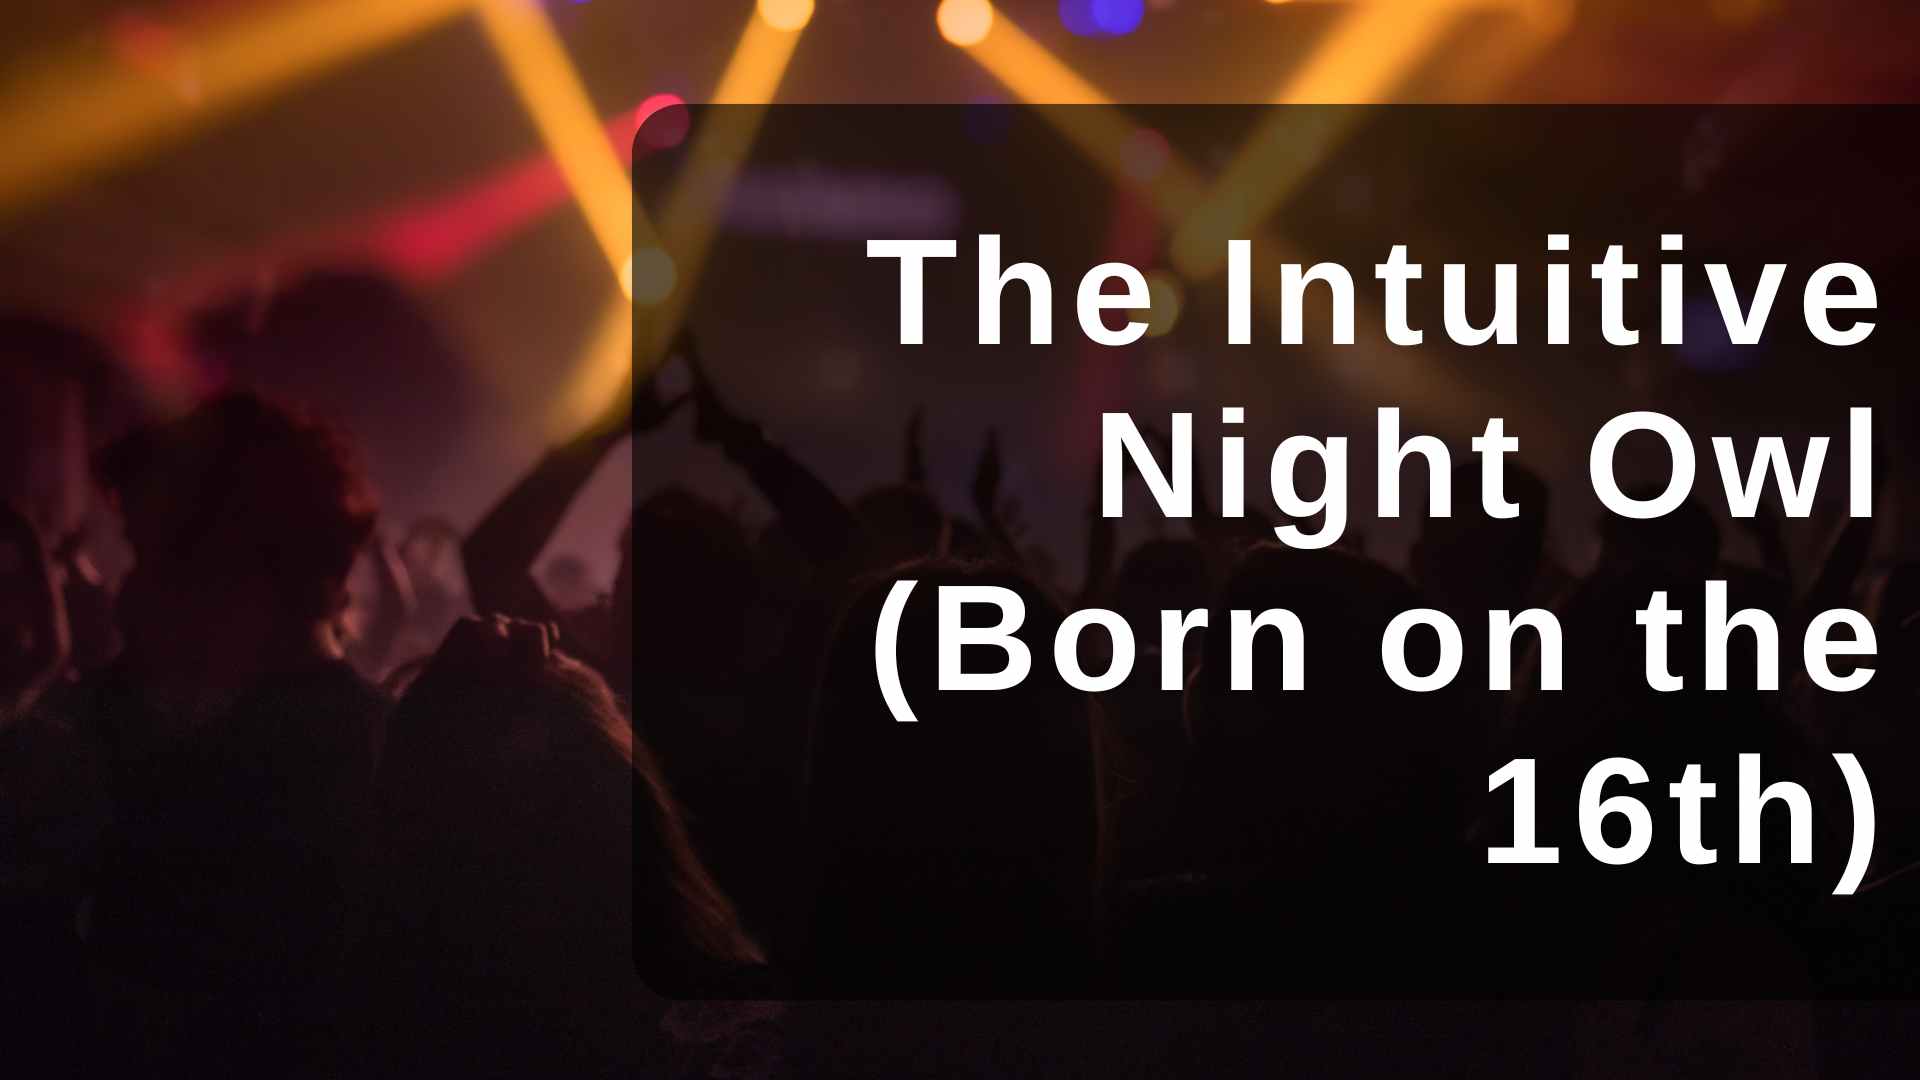 The Intuitive Night Owl (Born on the 16th)